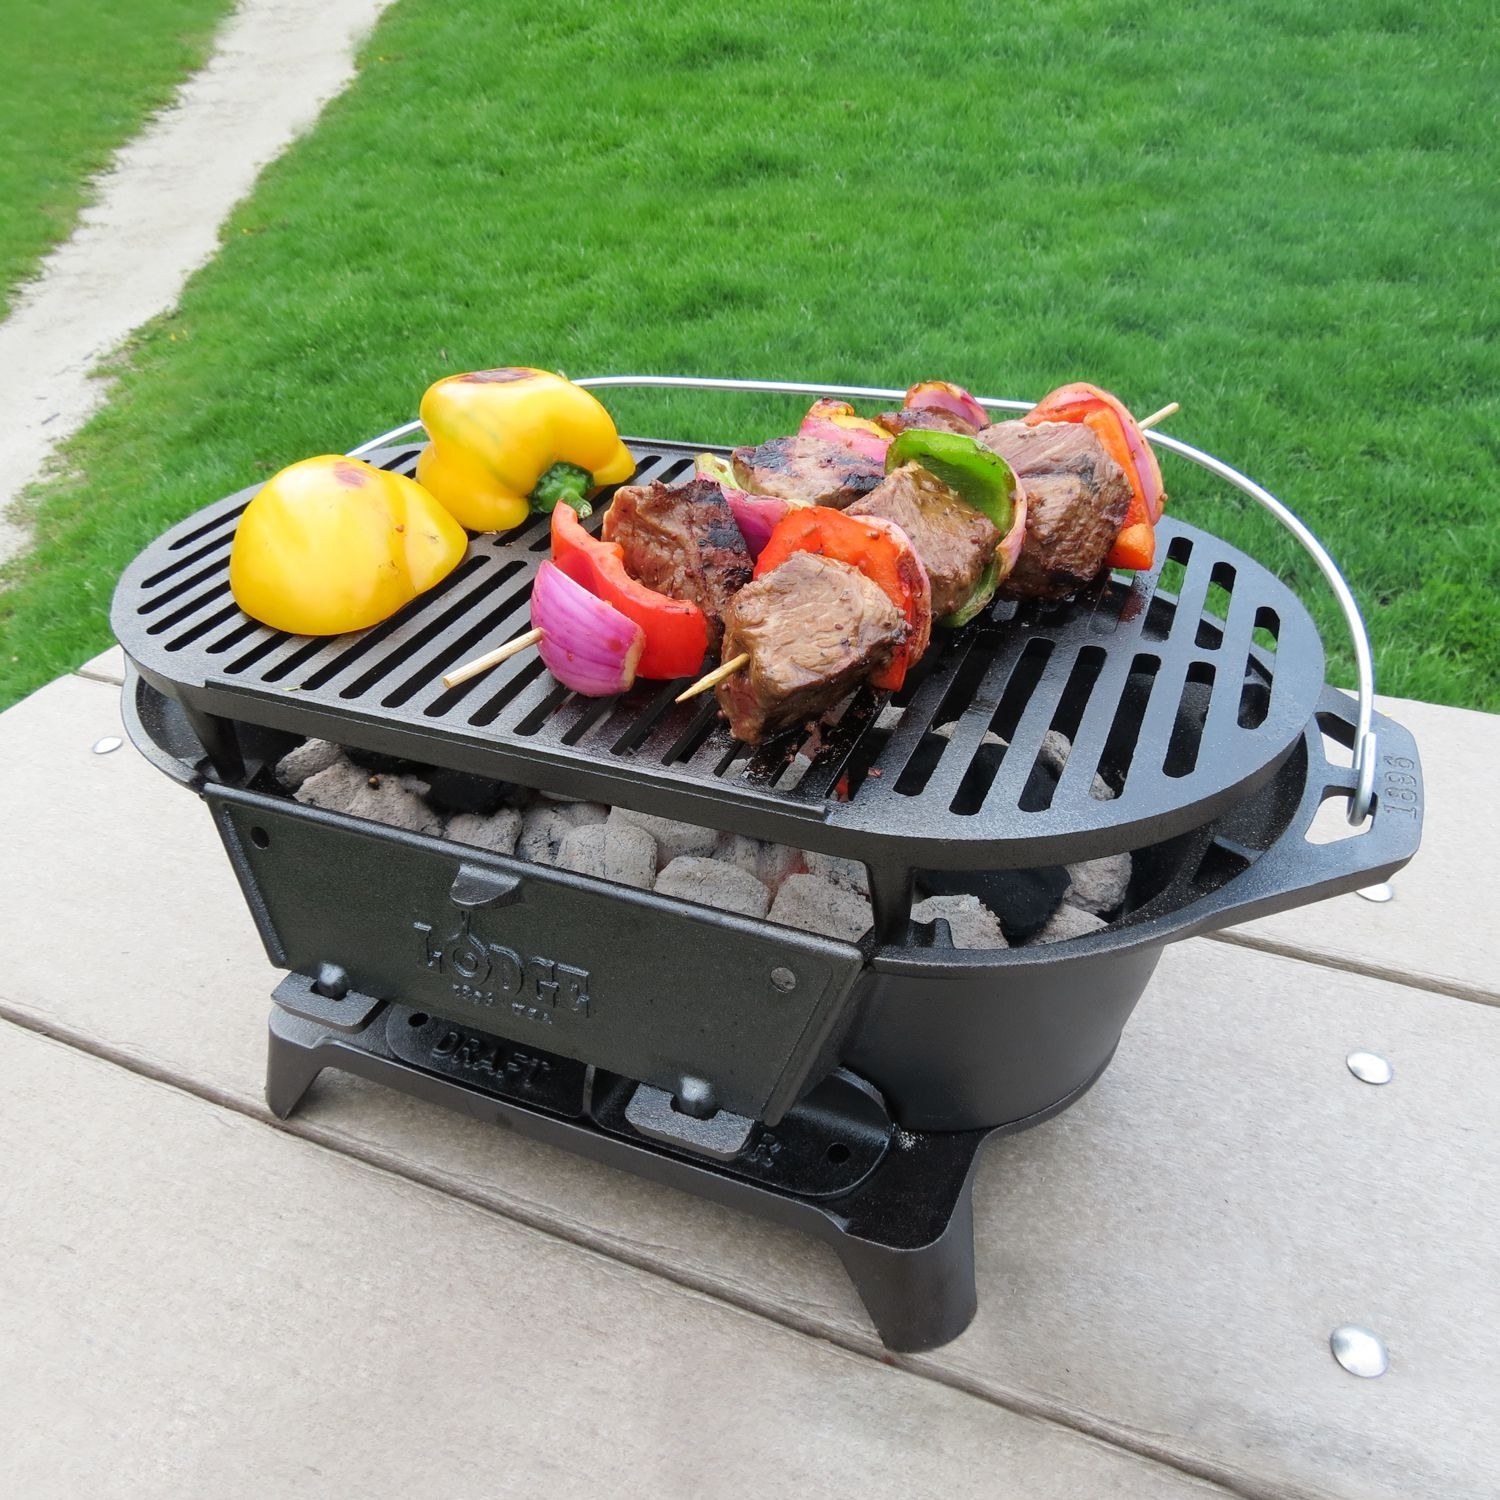 Lodge cast iron grill review full of flavor built to